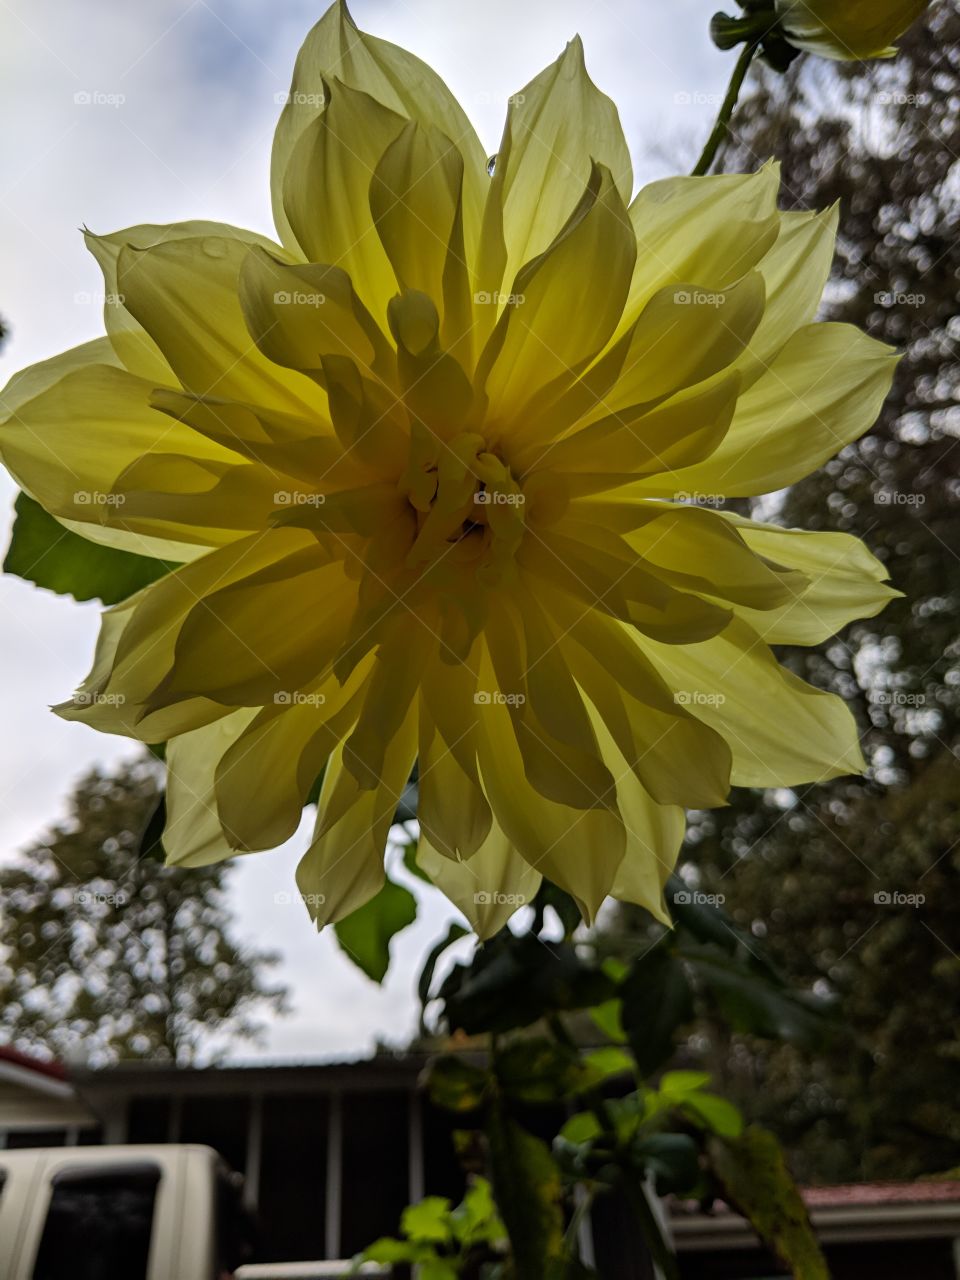 A large, yellow flower from a unique perspective. For anyone who likes a different angle, some nice shading, or just really likes flowers, this one is a must have!